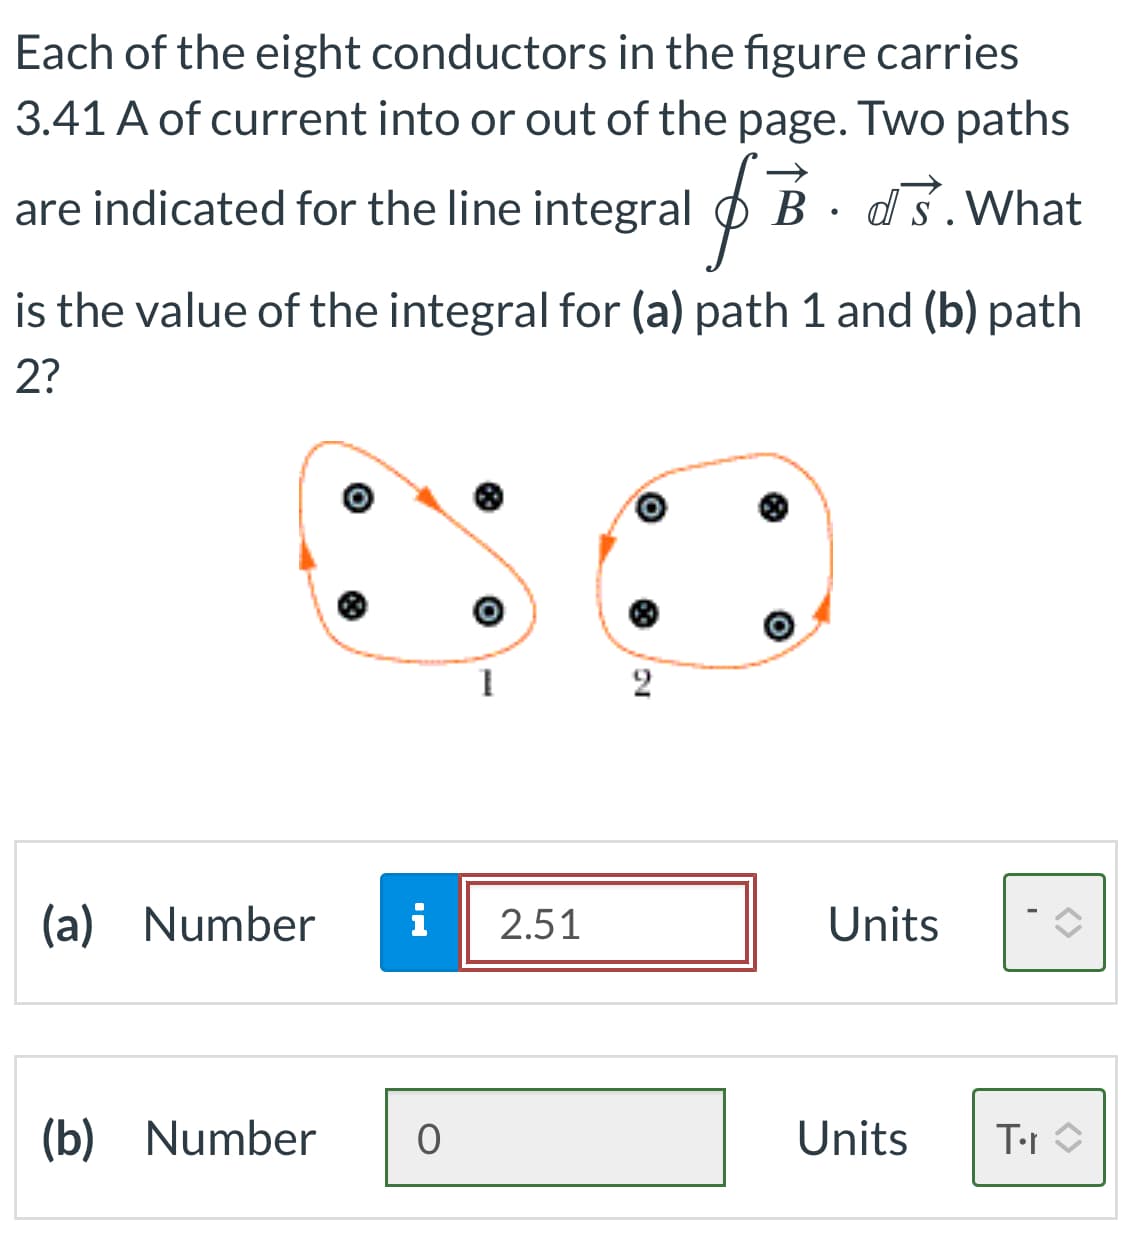 Each of the eight conductors in the figure carries
3.41 A of current into or out of the page. Two paths
are indicated for the line integral i B. ds. What
is the value of the integral for (a) path 1 and (b) path
2?
(a) Number
1
i 2.51
(b) Number O
2
Units
Units
T∙r
<>